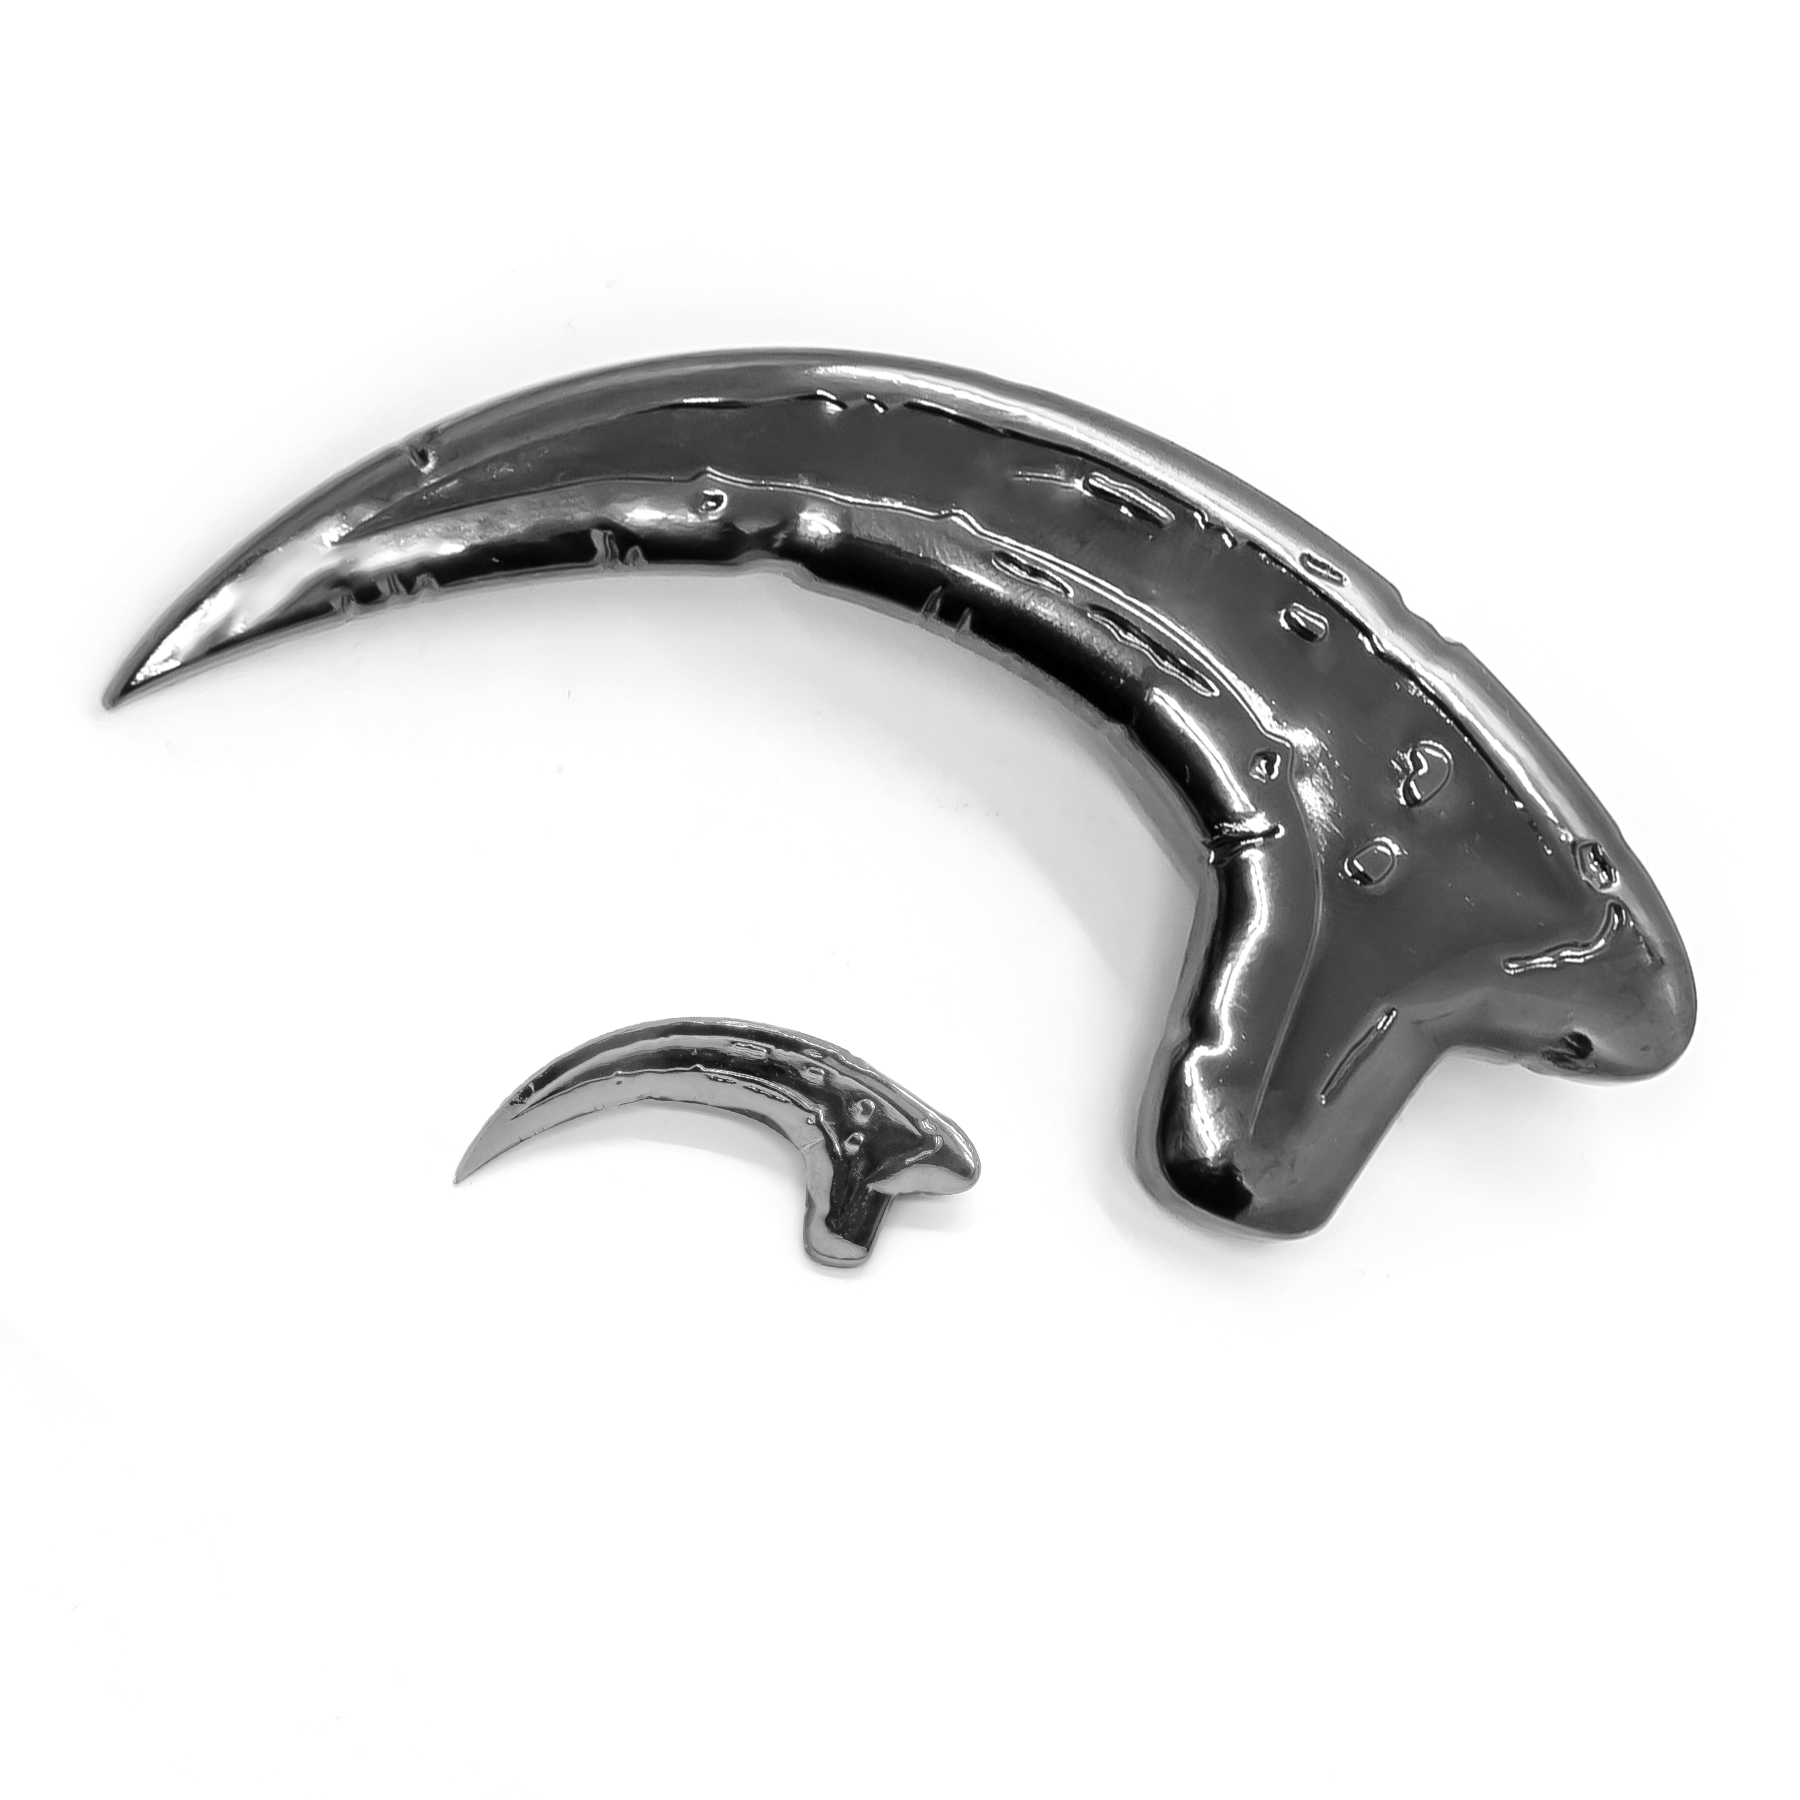 Large Raptor Claw molded pin